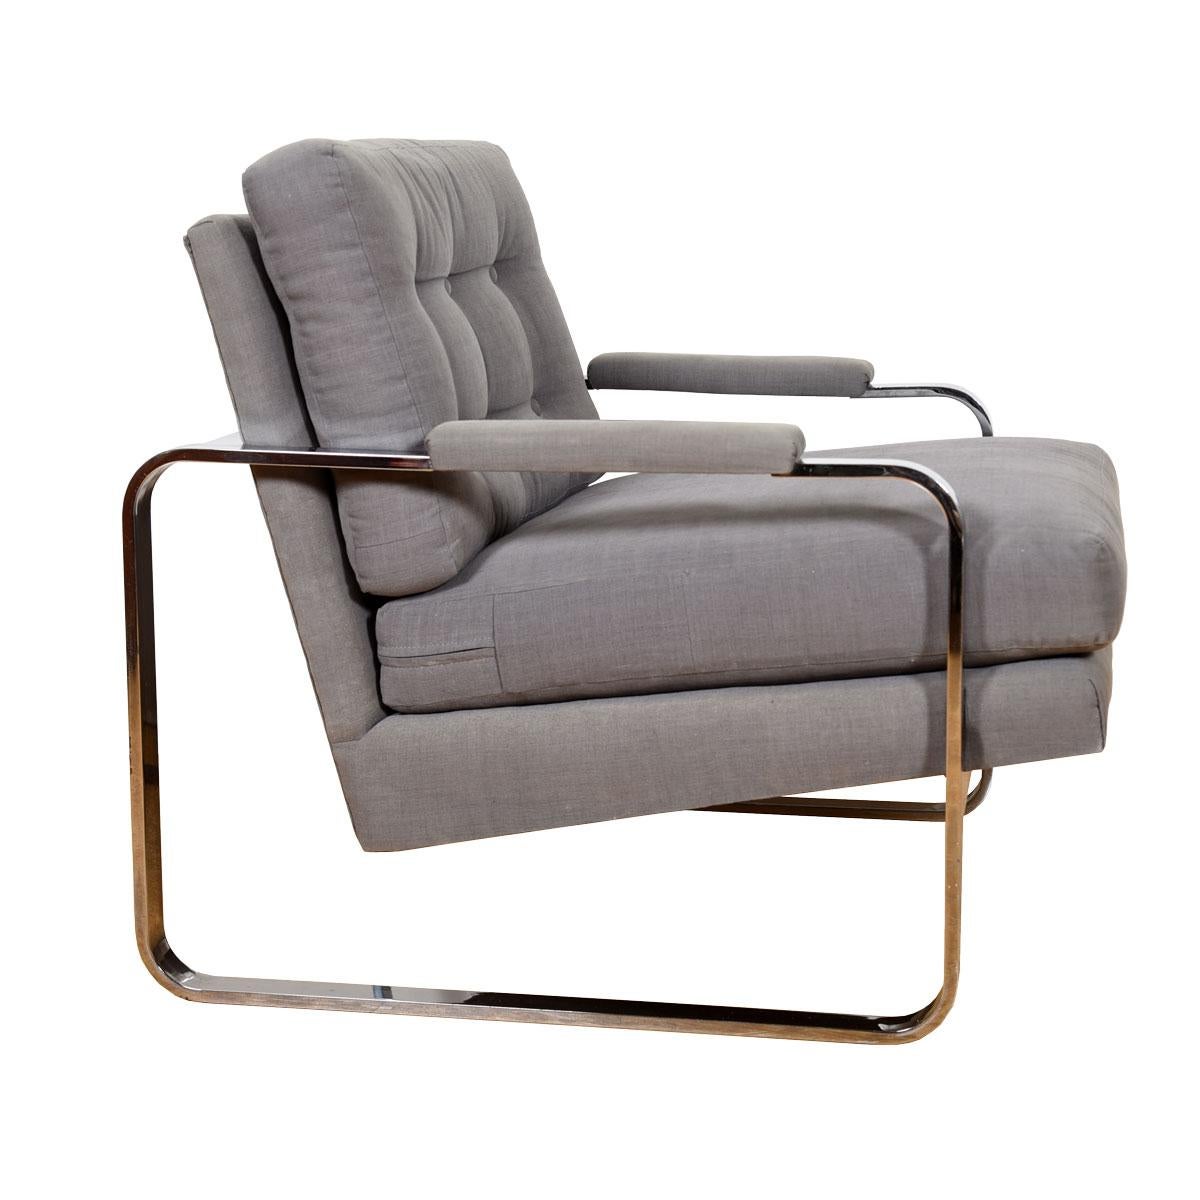 Handsome upholstered lounge chrome chair with upholstered seats, attributed to Milo Baughman for Thayer Coggin.
Into an open cube frame of chrome a fully upholstered back and seat have been placed at a slight angle for a dynamic look, as well as